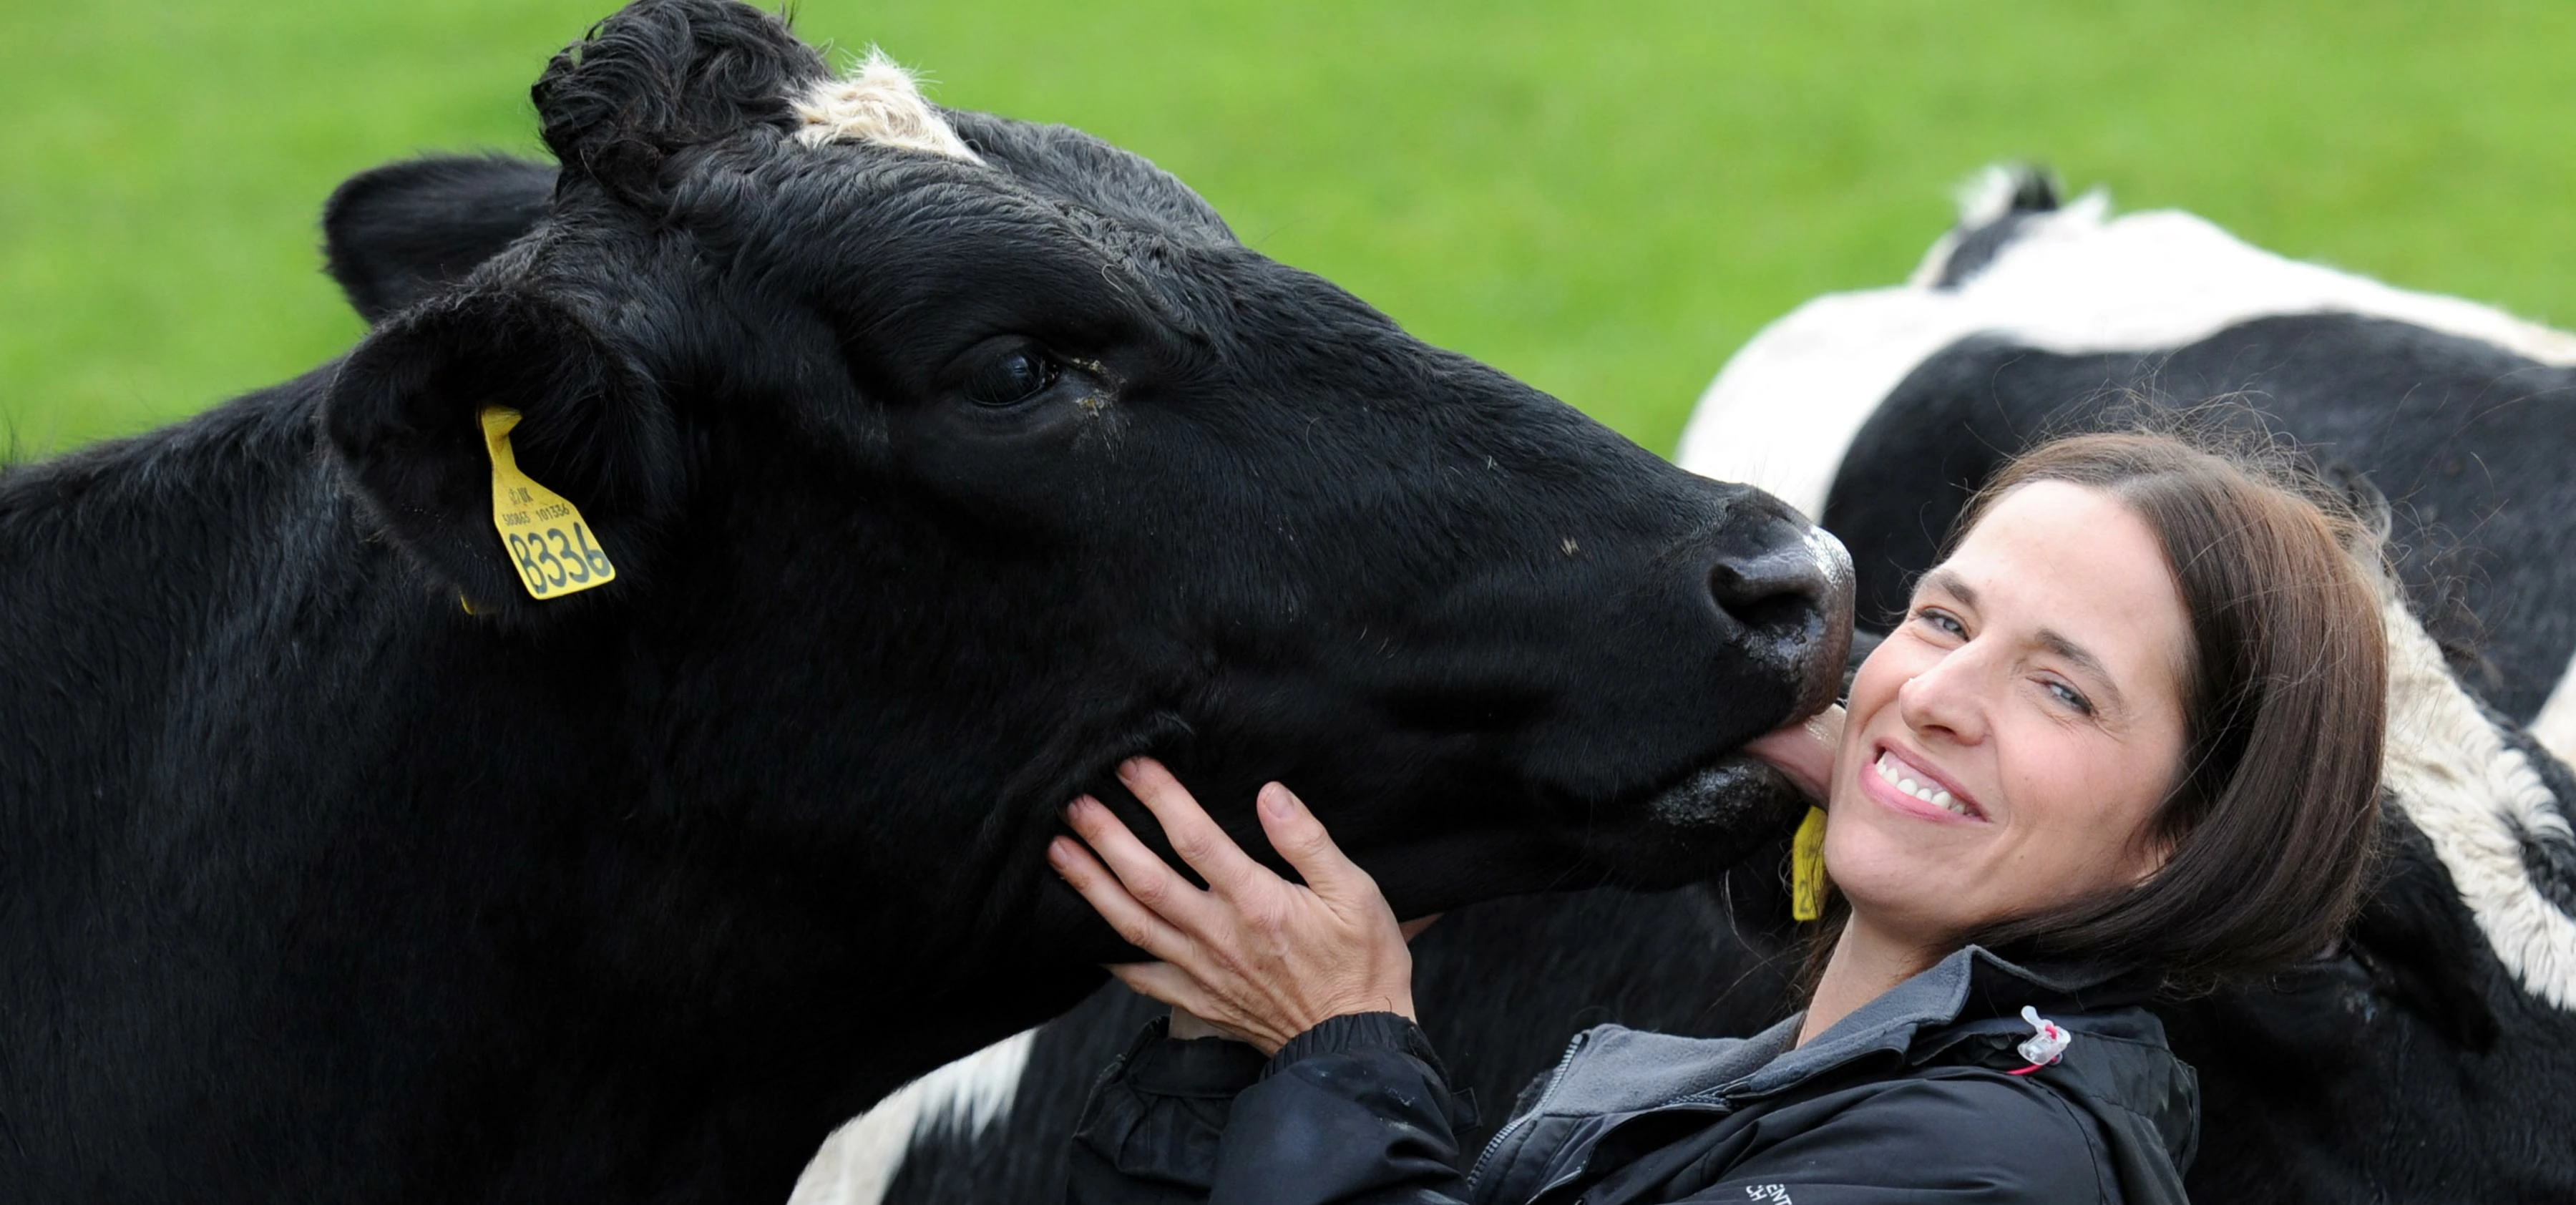 Lynn Jolly hopes to open central Scotland's first ever fully vegan animal sanctuary. 